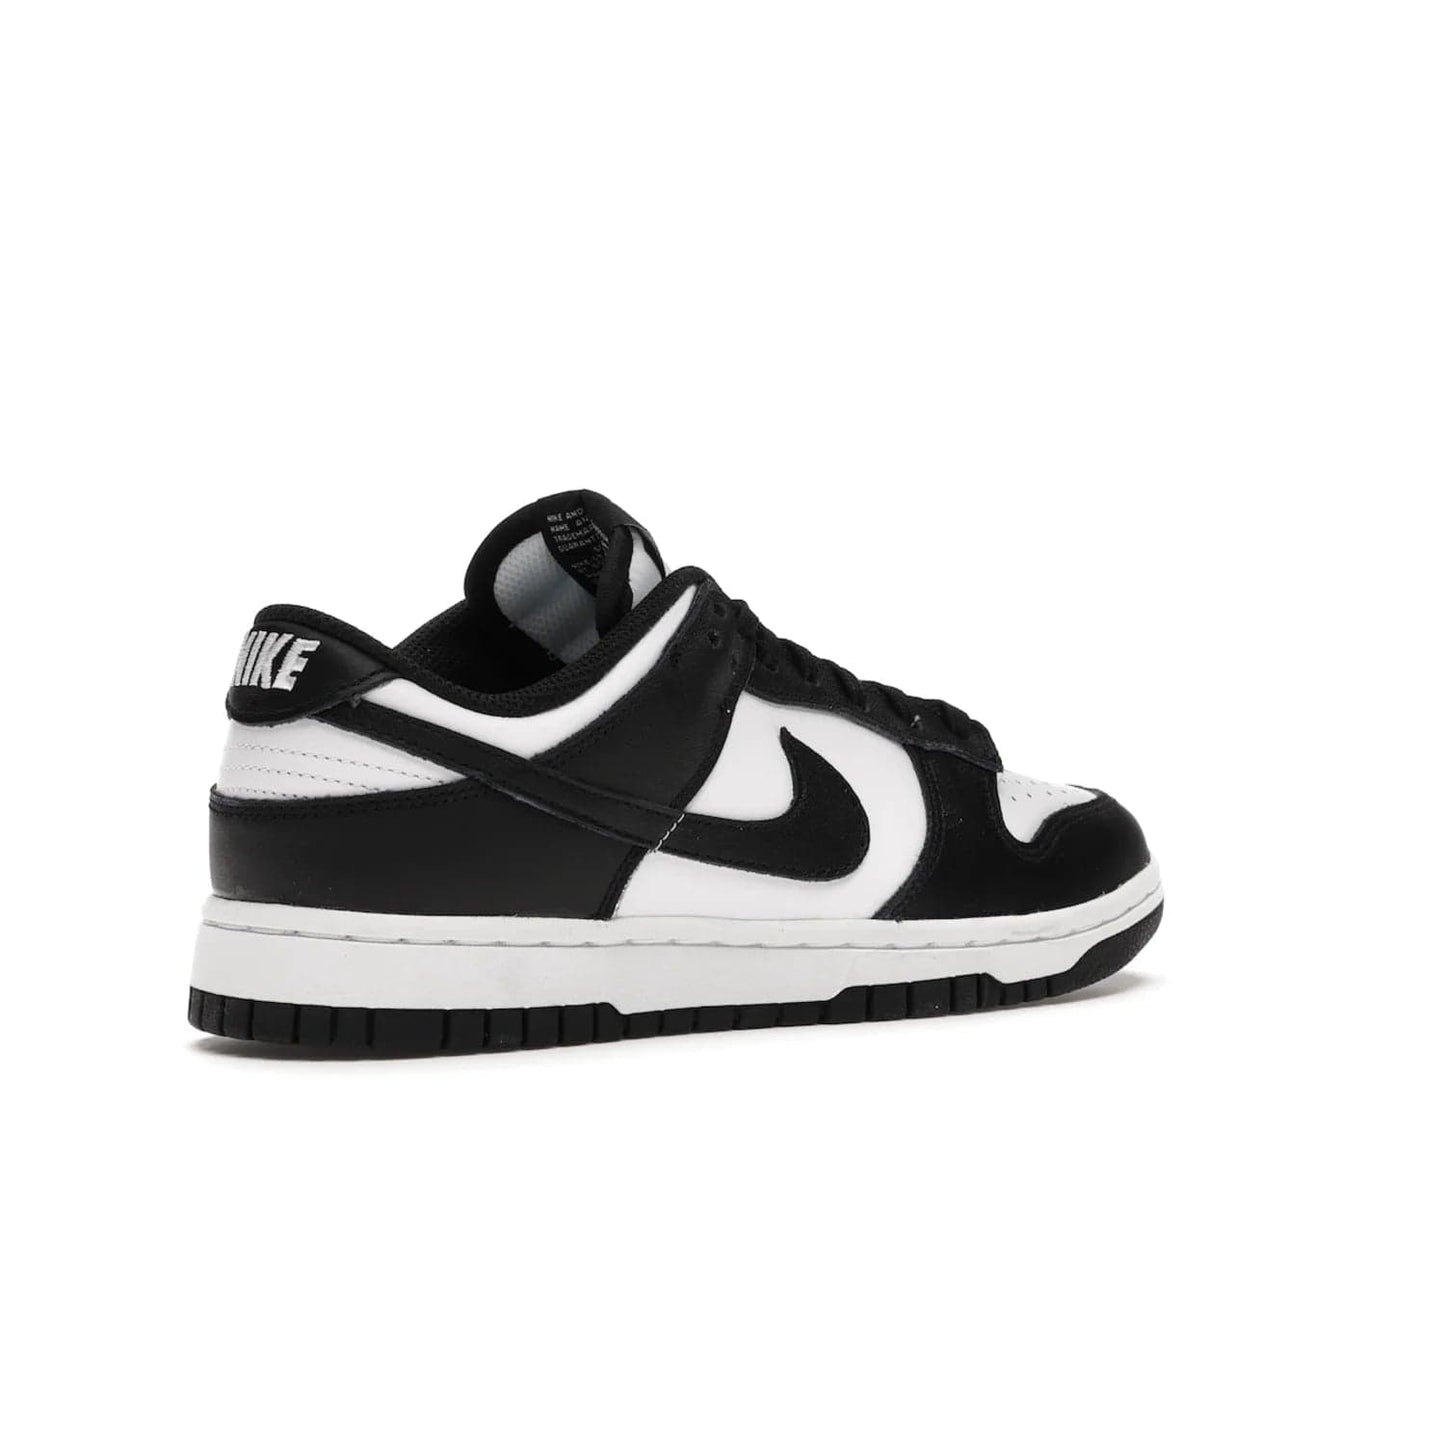 Nike Dunk Low Retro White Black Panda (2021) (Women's) - Image 33 - Only at www.BallersClubKickz.com - Say hello to the new Nike Dunk Low Retro White Black Panda (2021) (Women's)! White & black leather upper with Nike Swoosh logo. Get your pair for $100 in March 2021! Shop now!